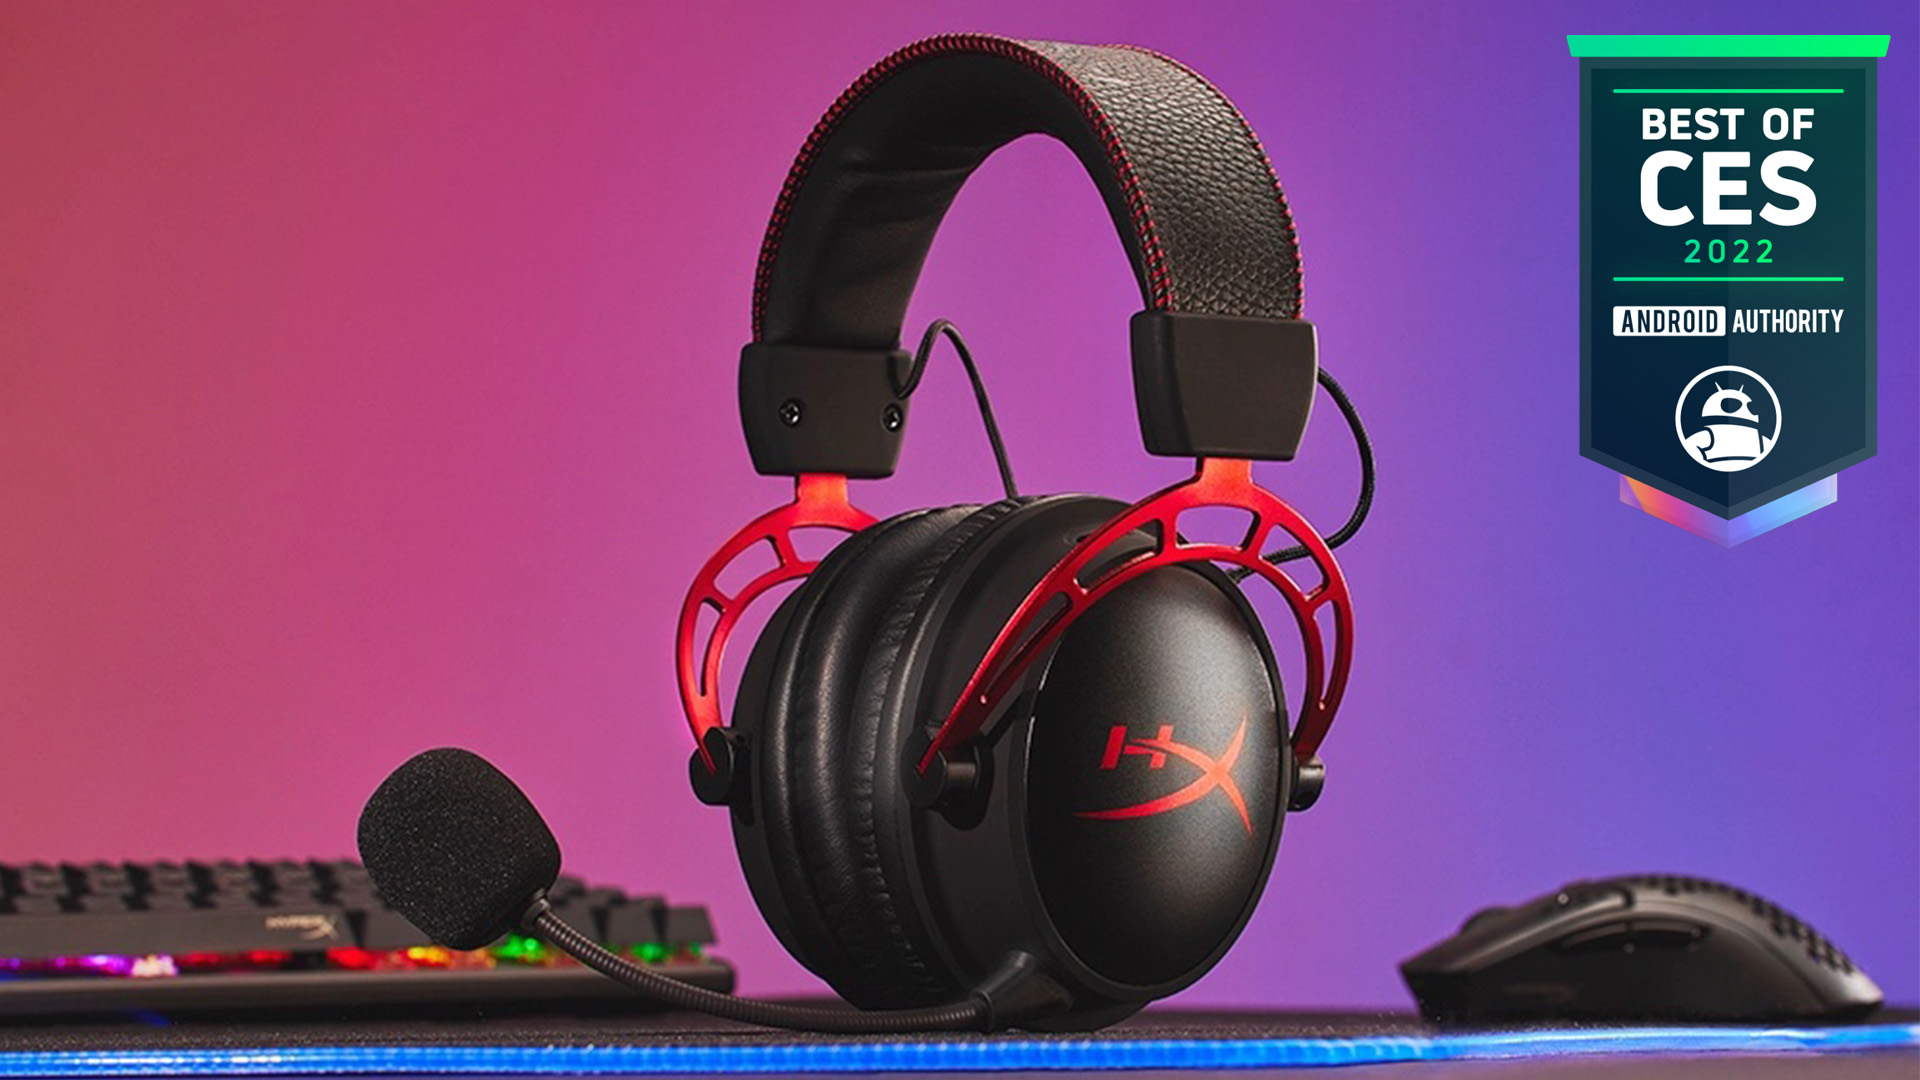 HyperX Cloud Alpha Wireless Android Authority Best of CES 2022 Award winner